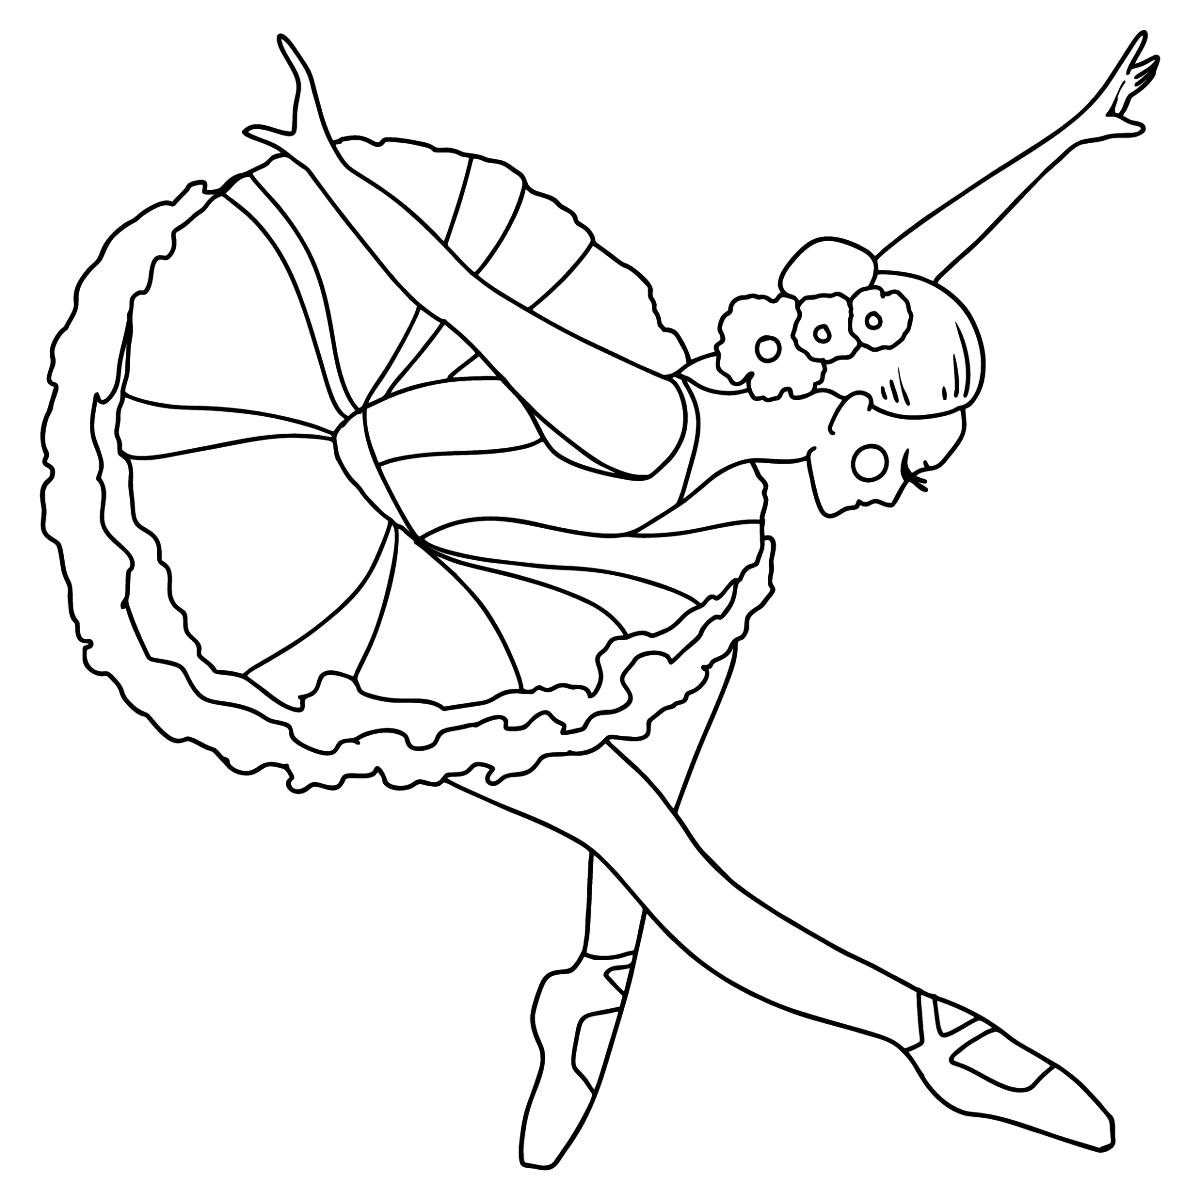 Ballerina coloring pages for Kids - Print for Free, and Color Online!